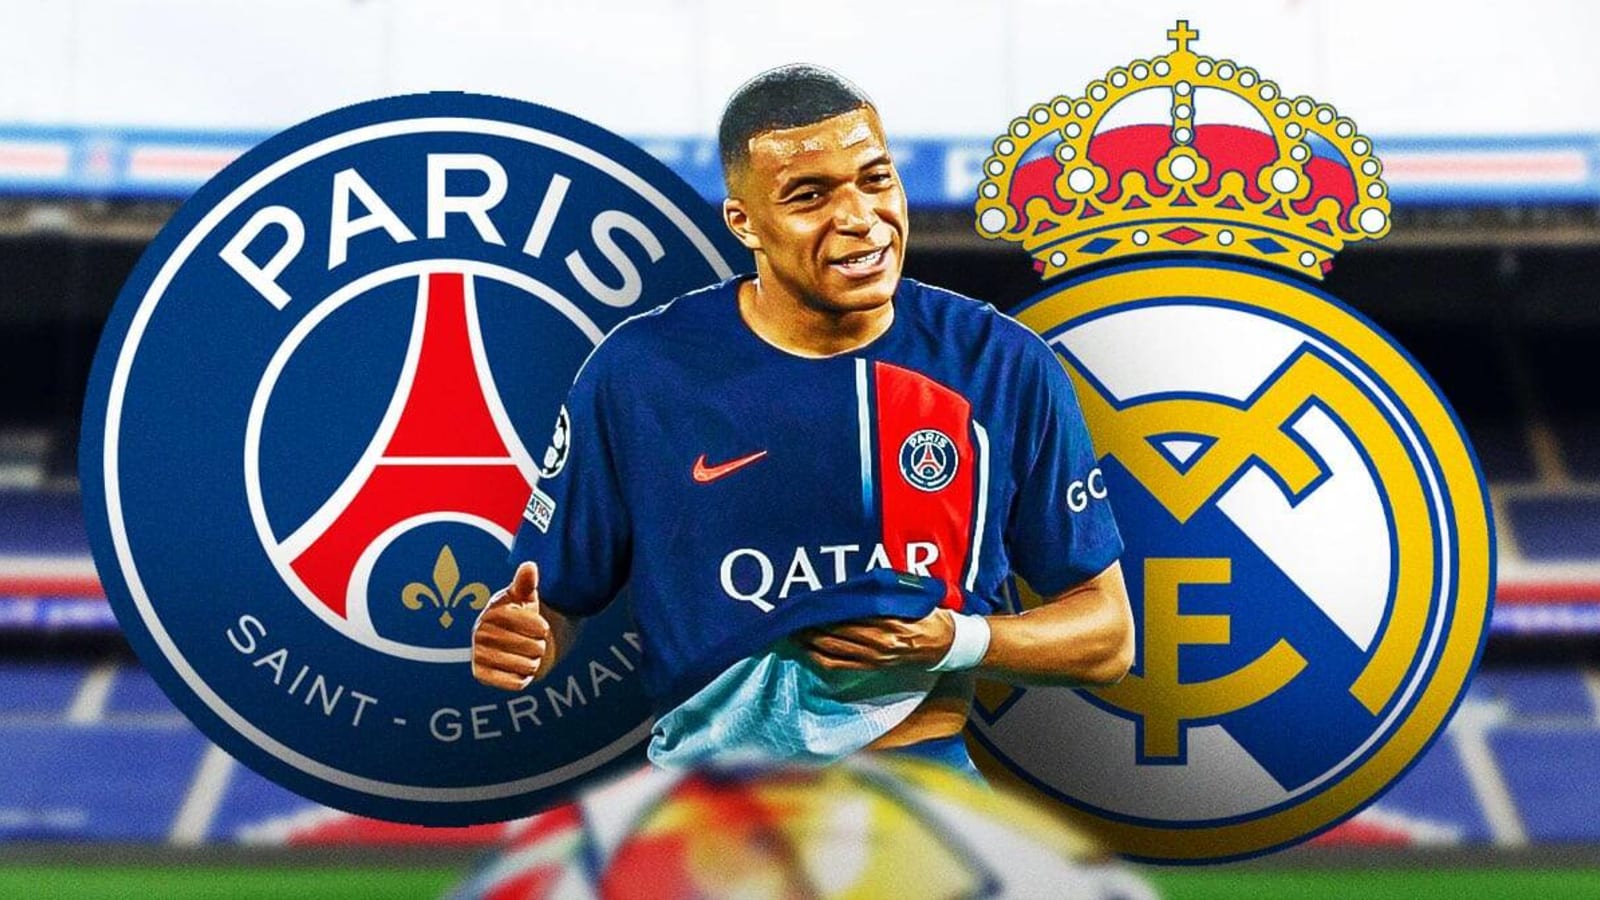 PSG drop hint on Kylian Mbappe’s move to Real Madrid